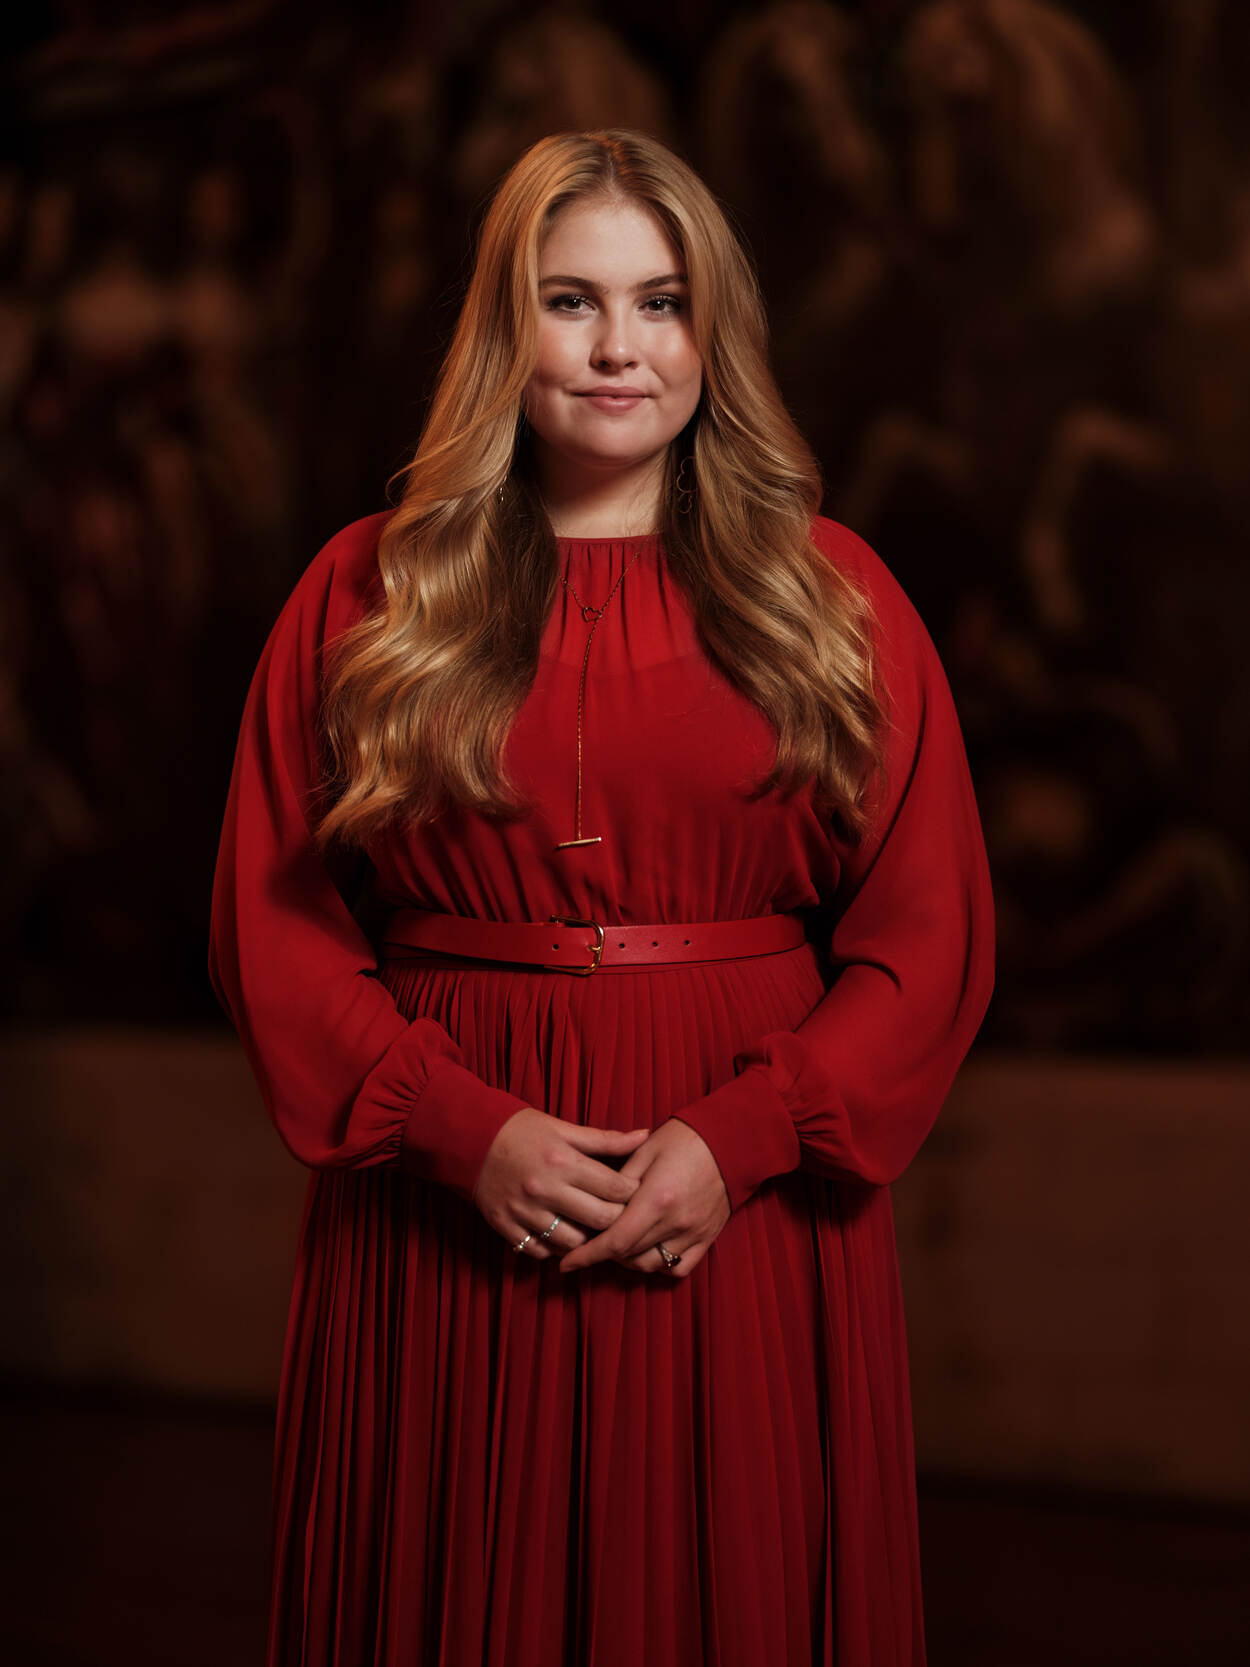 The Princess of Orange | Royal House of the Netherlands